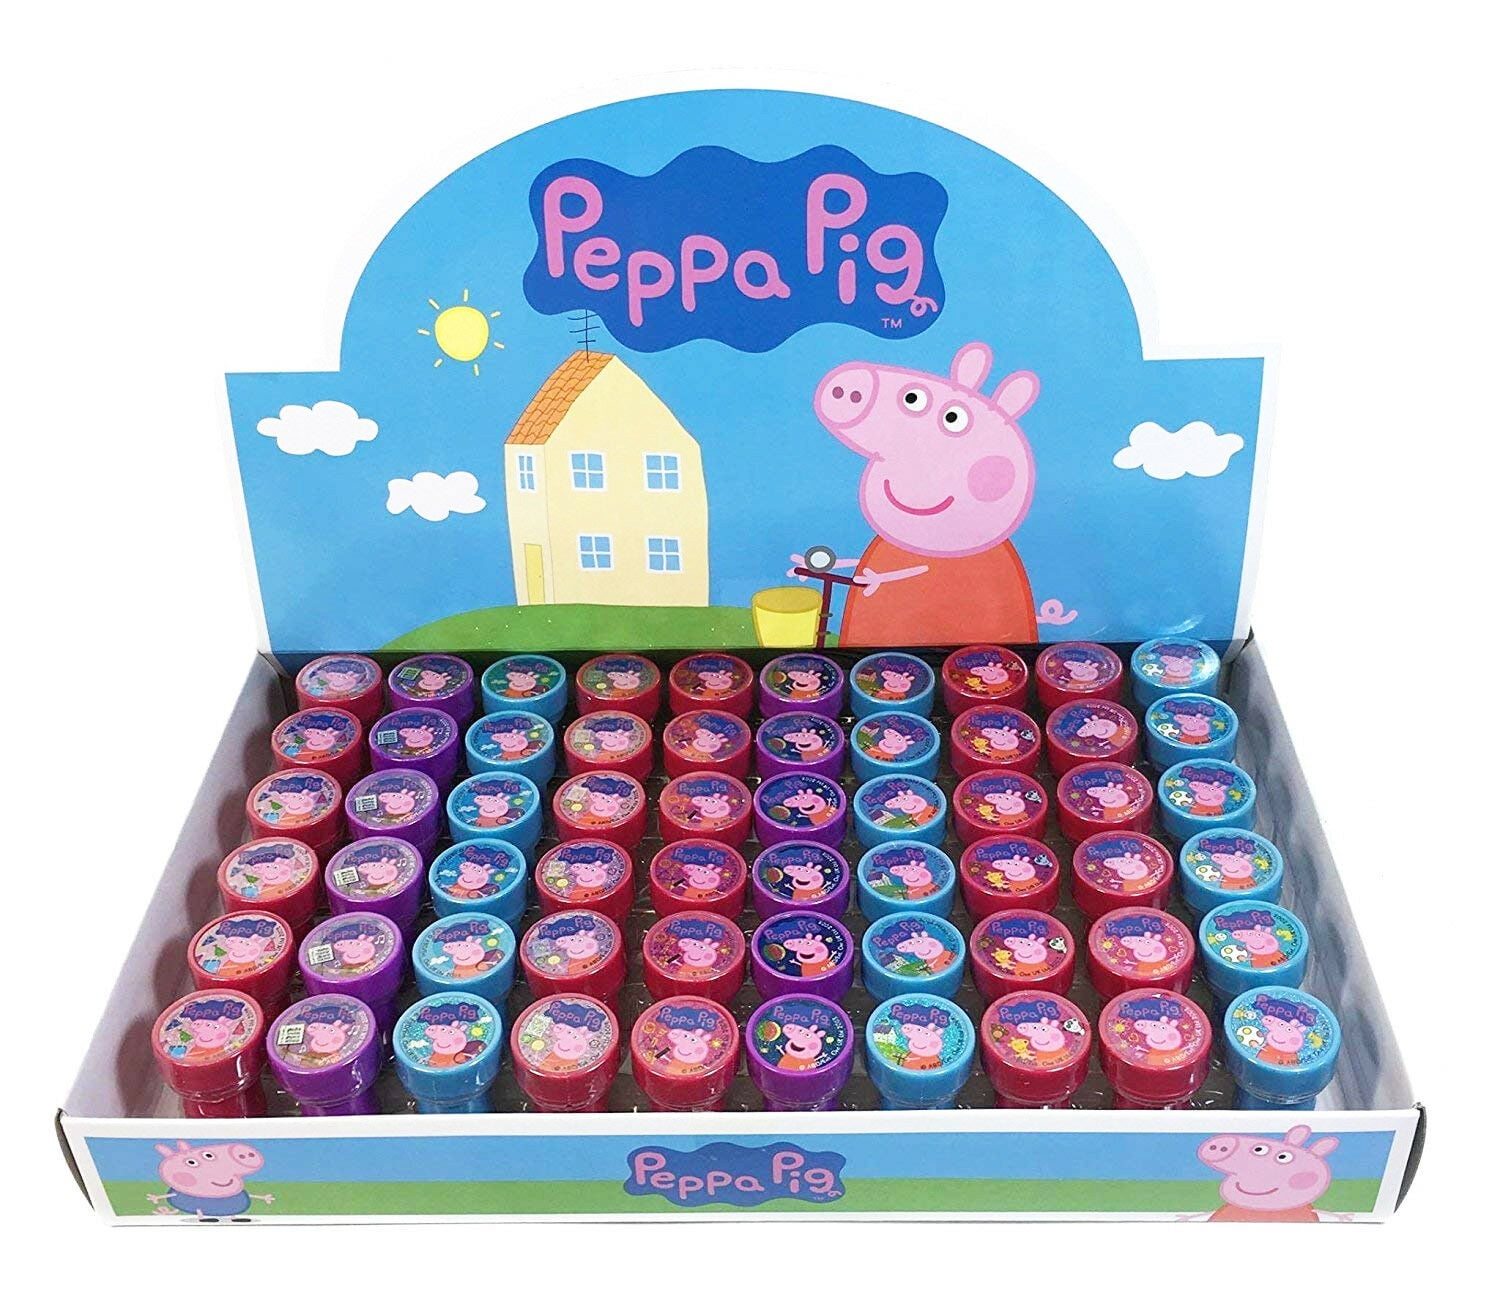 6x-60x New Peppa Pig Self-Inking Stamps Birthday Party Favors Gift Bags 